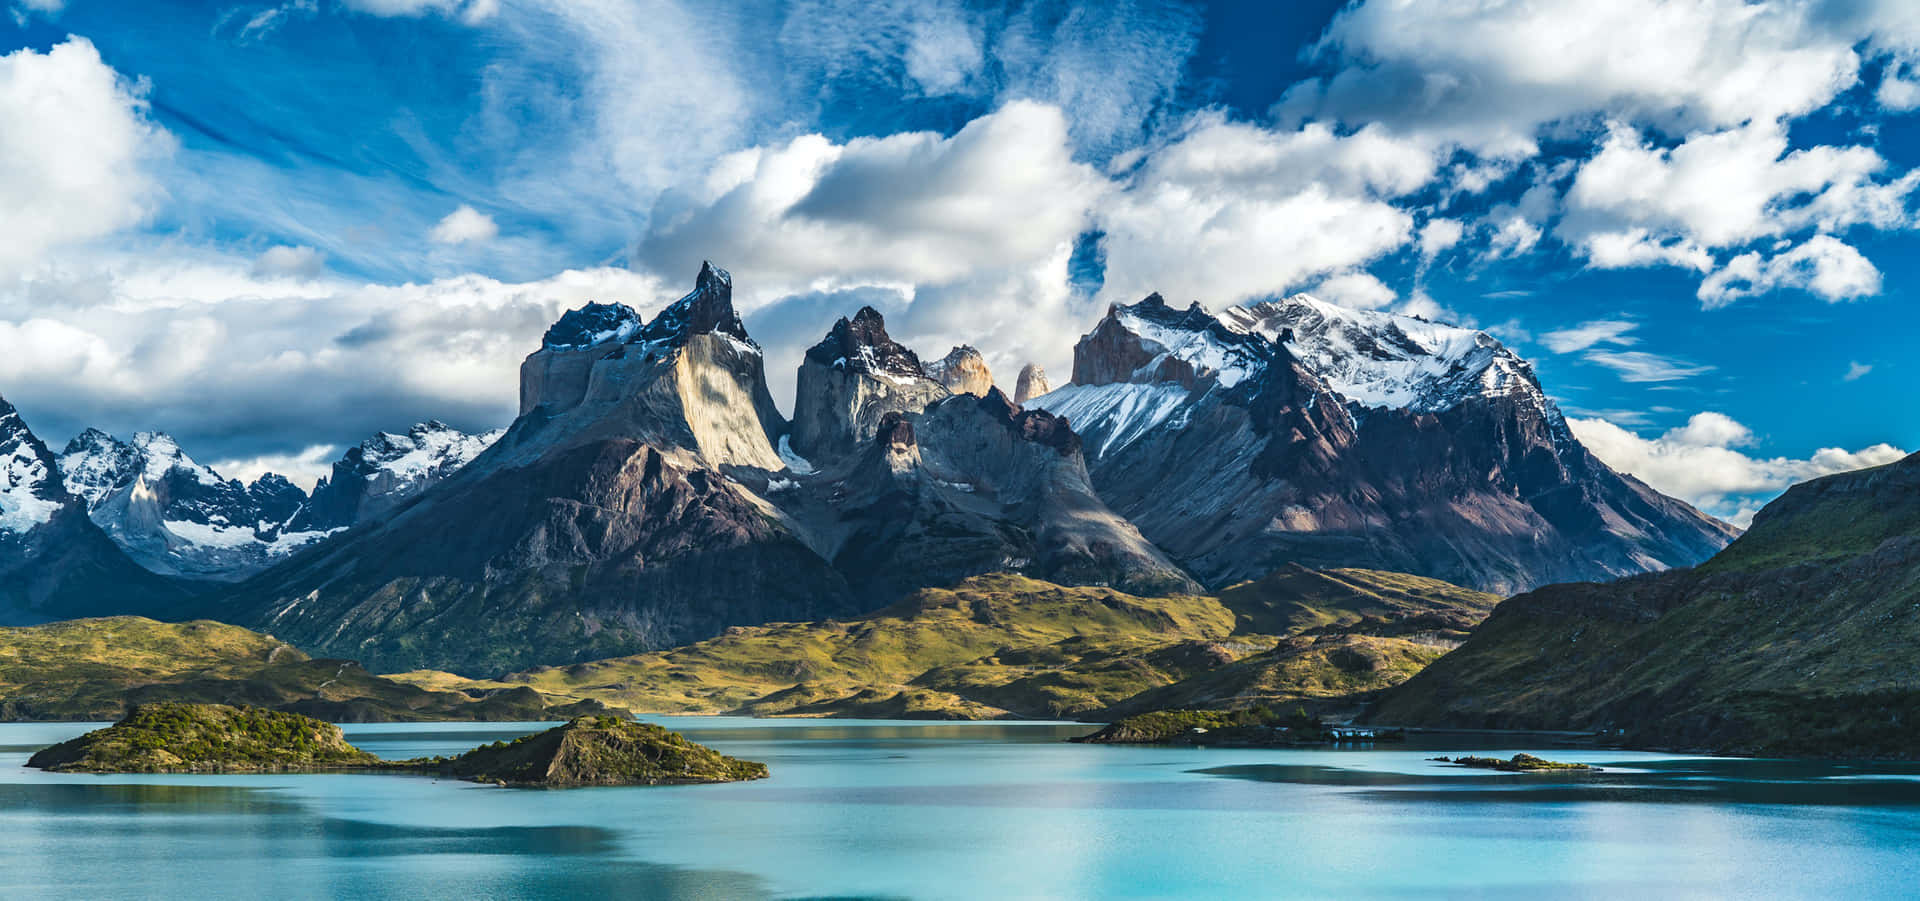 Sunny Day In Torres Del Paine National Park Wallpaper